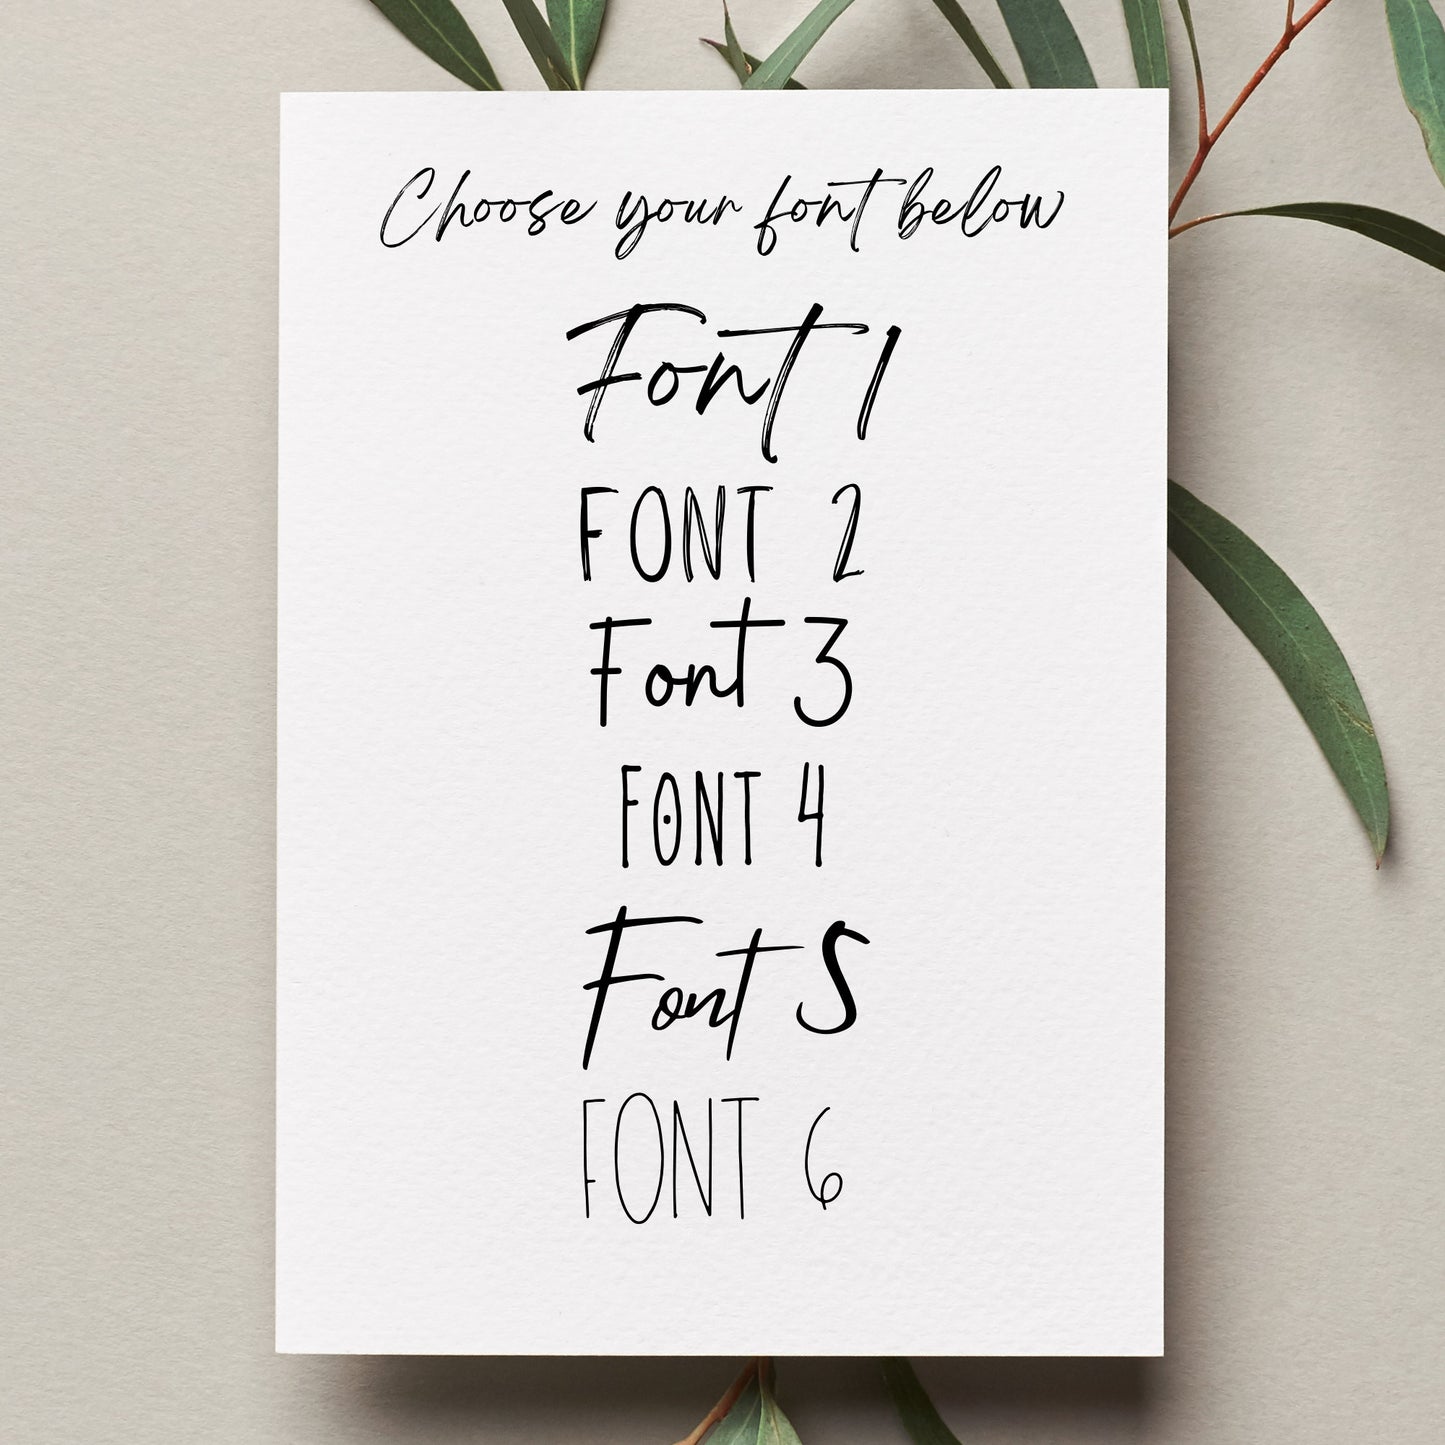 Personalised Card: Pick Your Own Font!